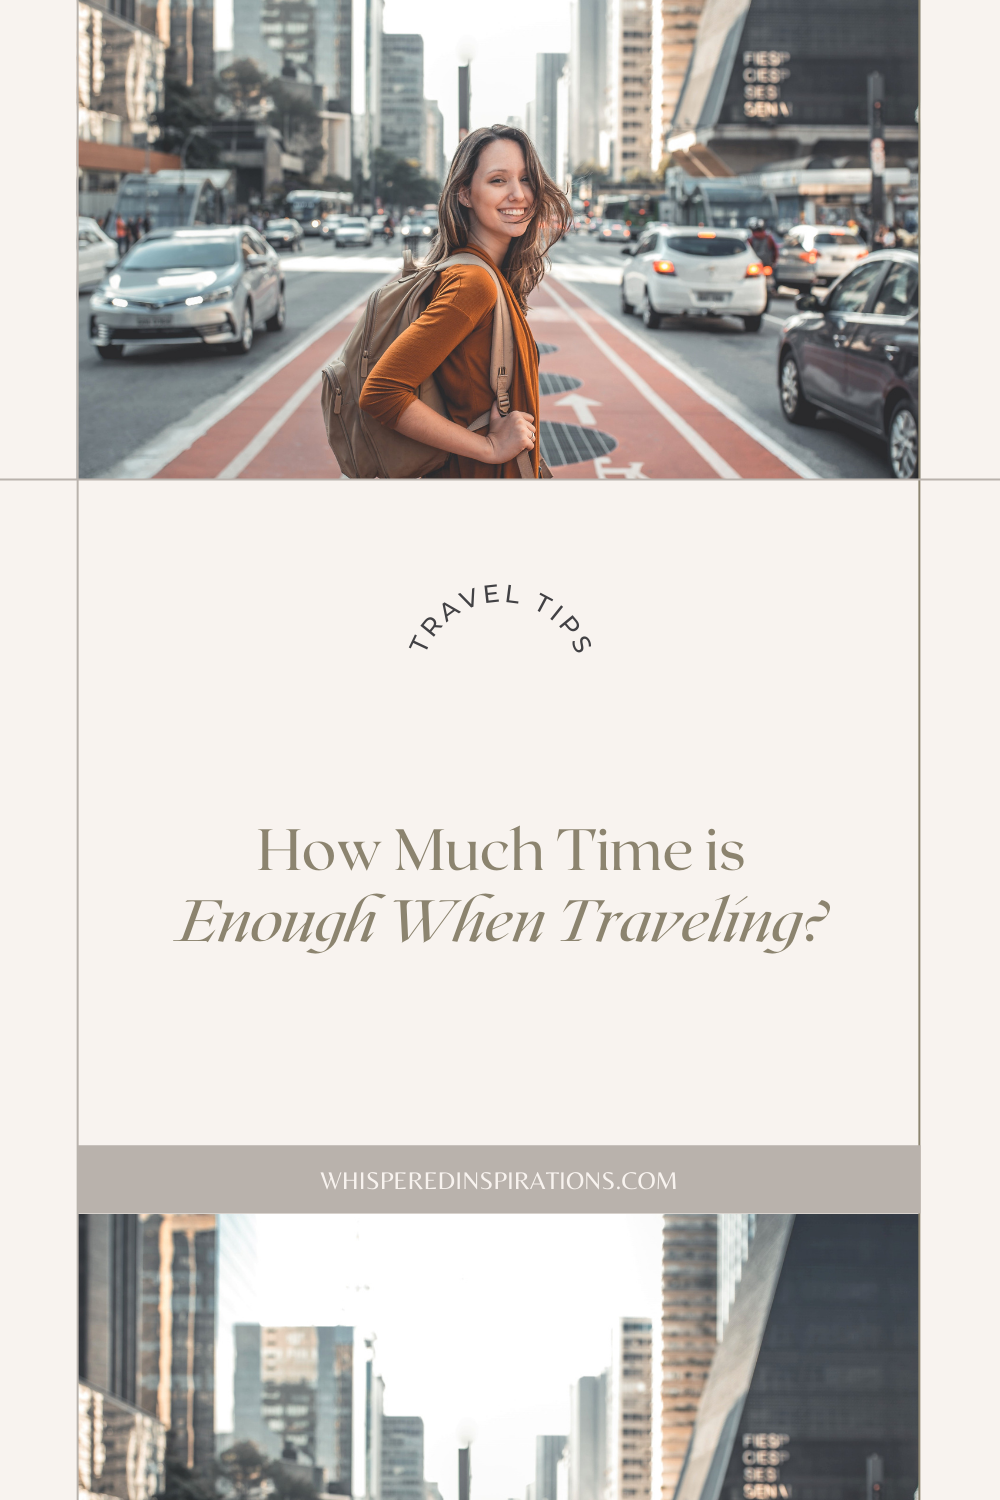 A woman is backpacking through Sao Paolo and takes a picture in the city streets. This article covers how much time is enough for traveling?